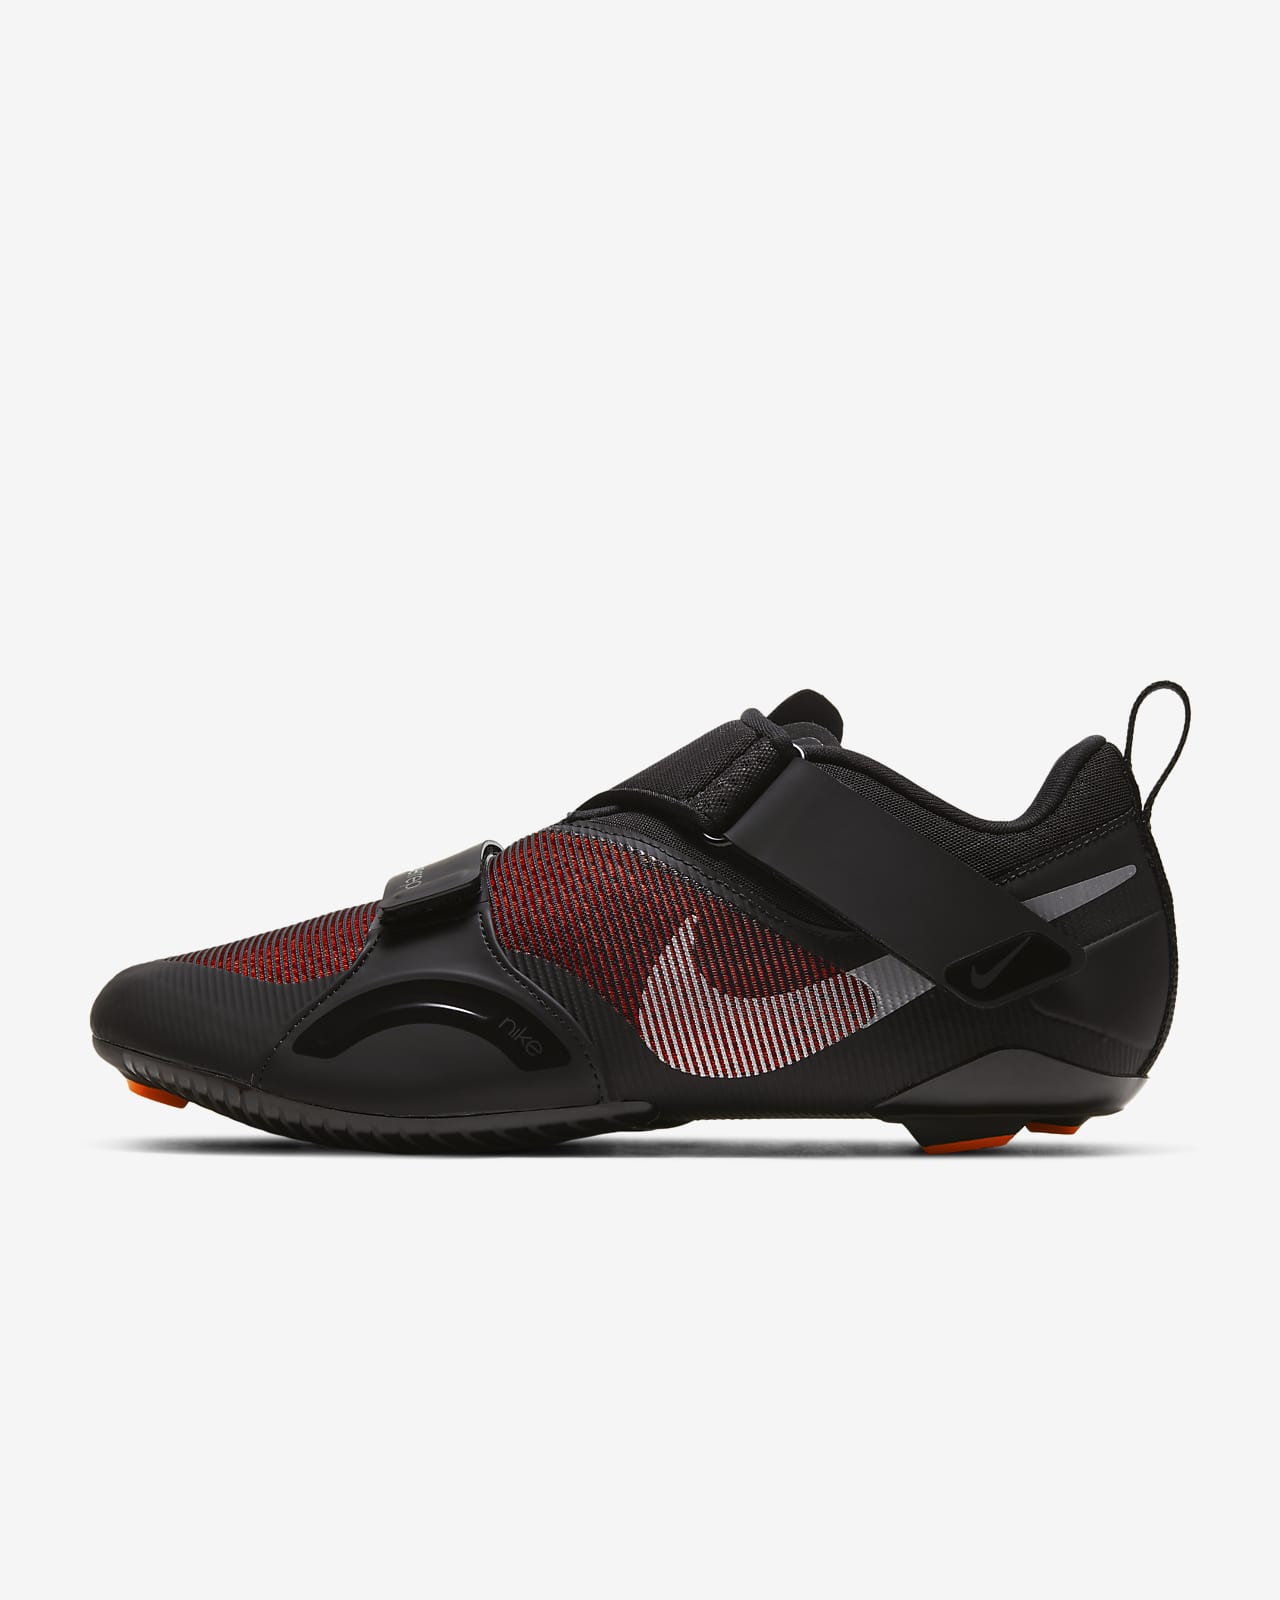 nike shoes price for men